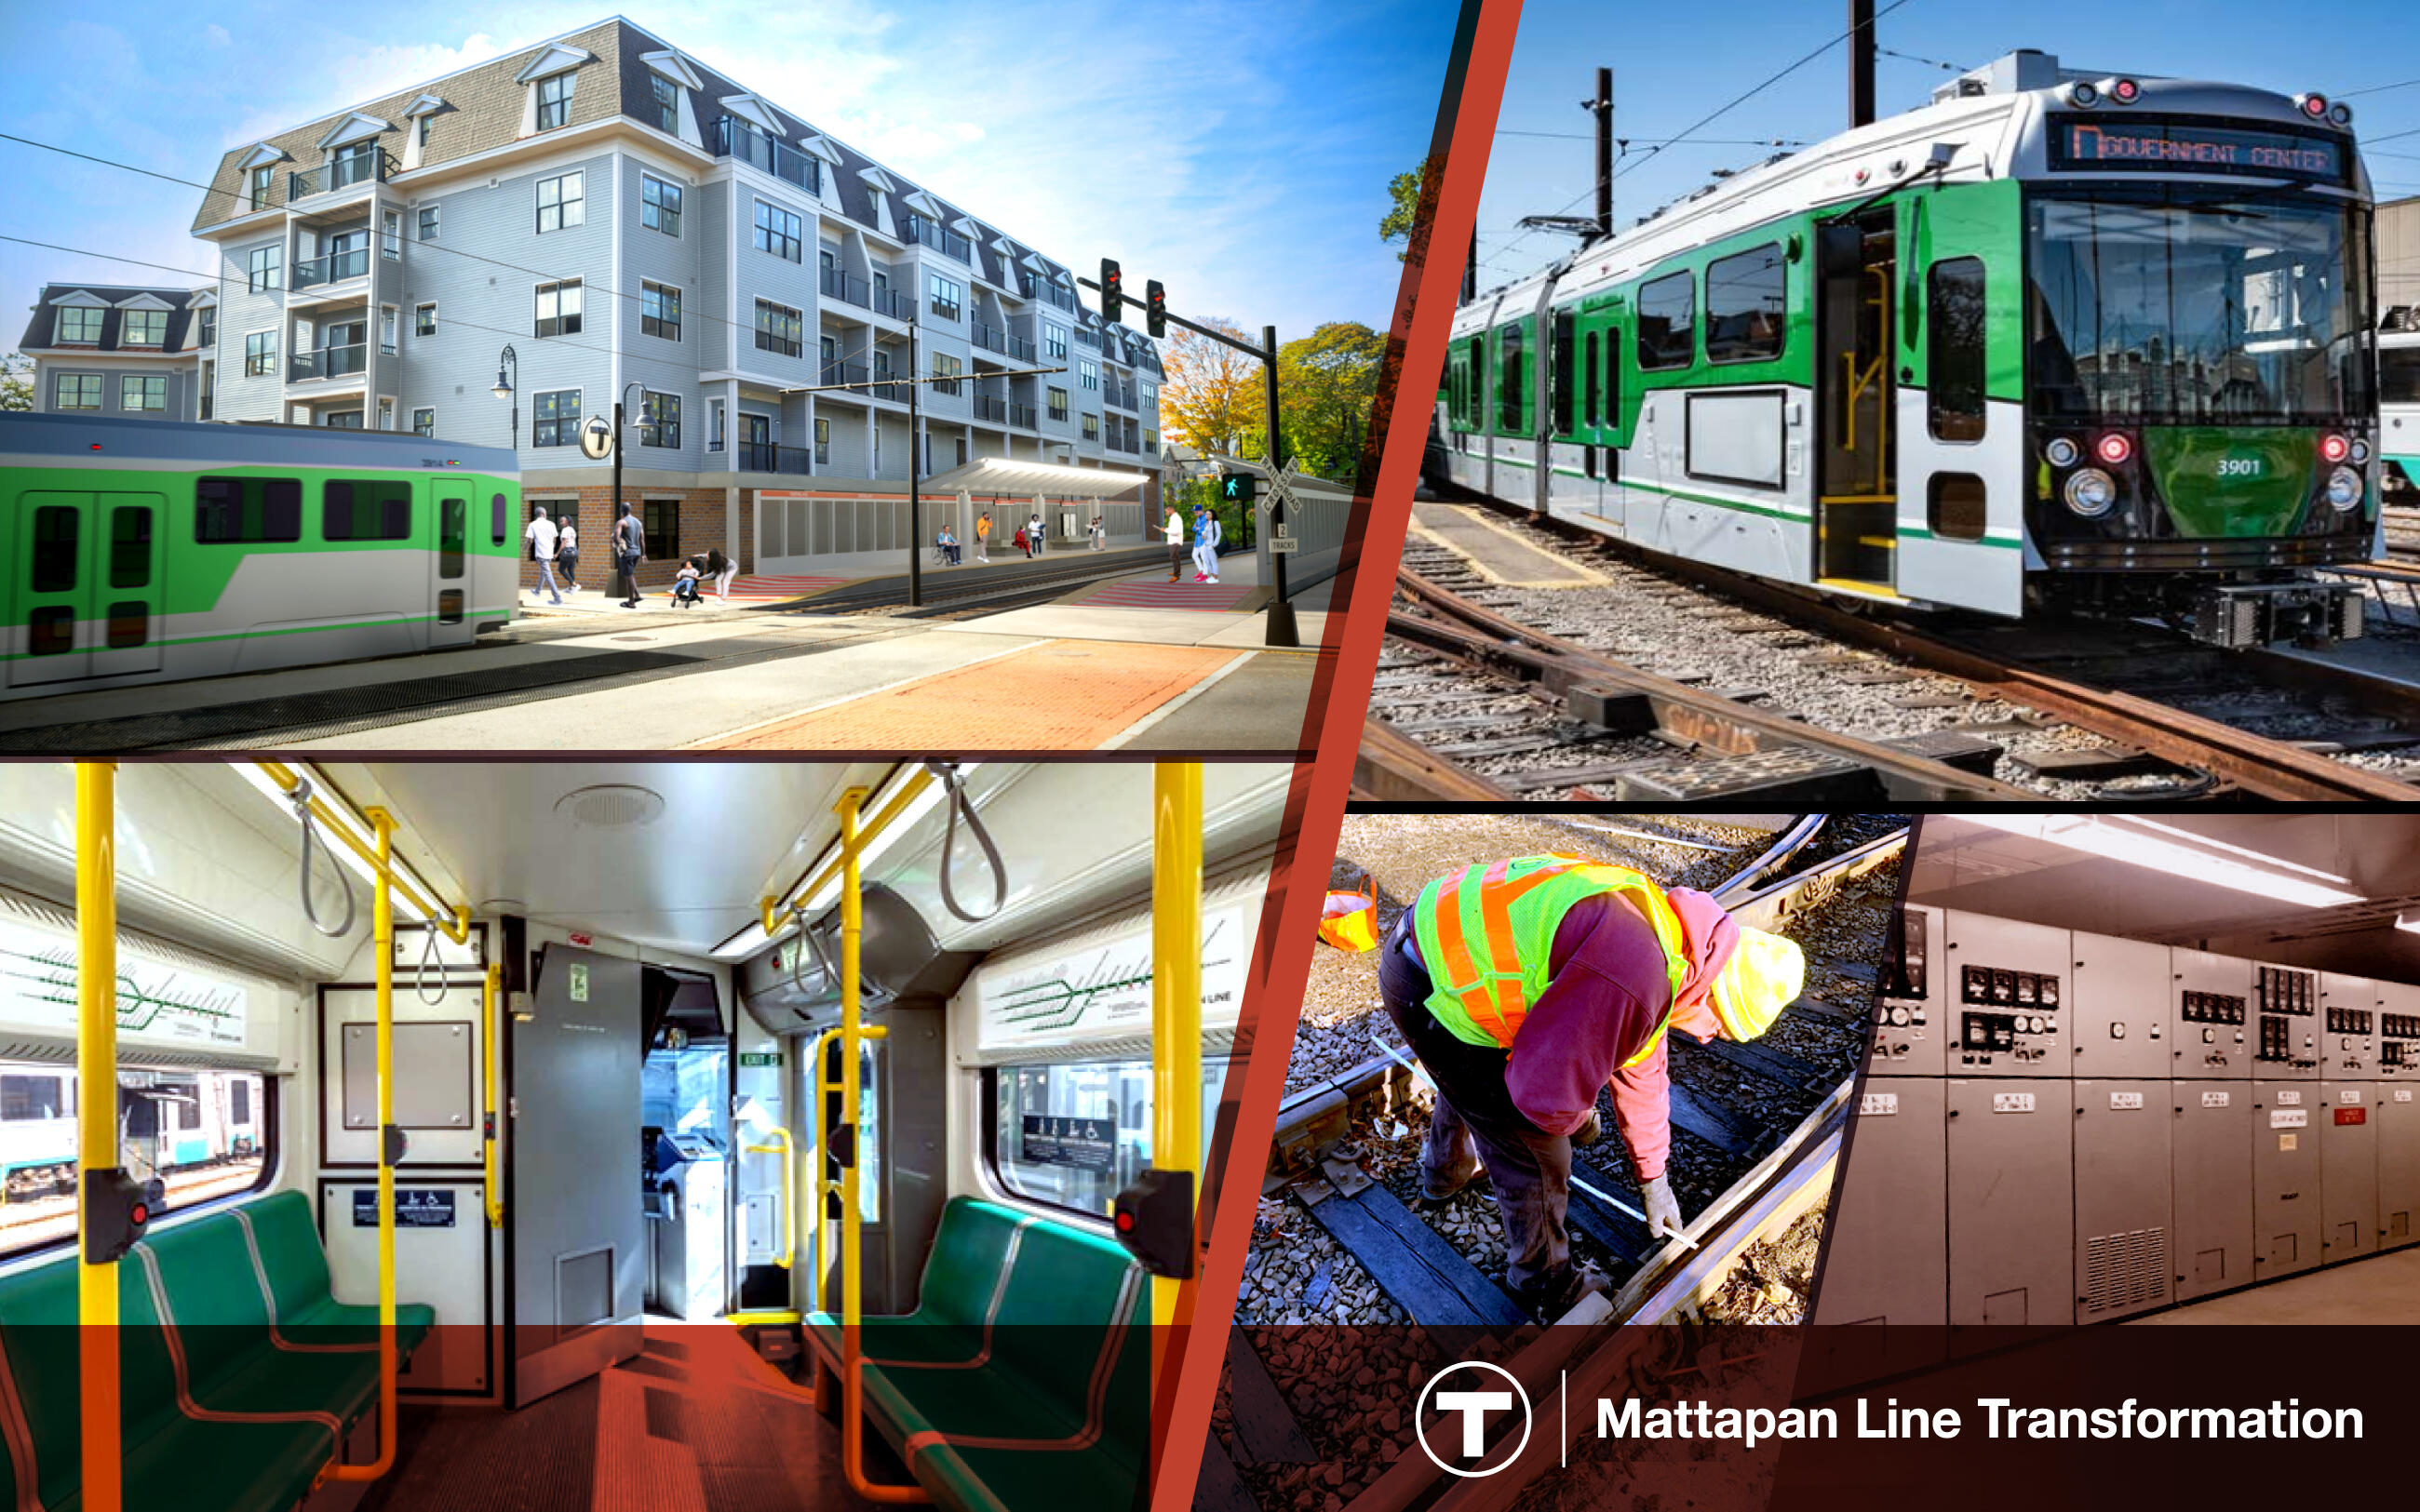 collage image of workers on tracks, green line train, and new building